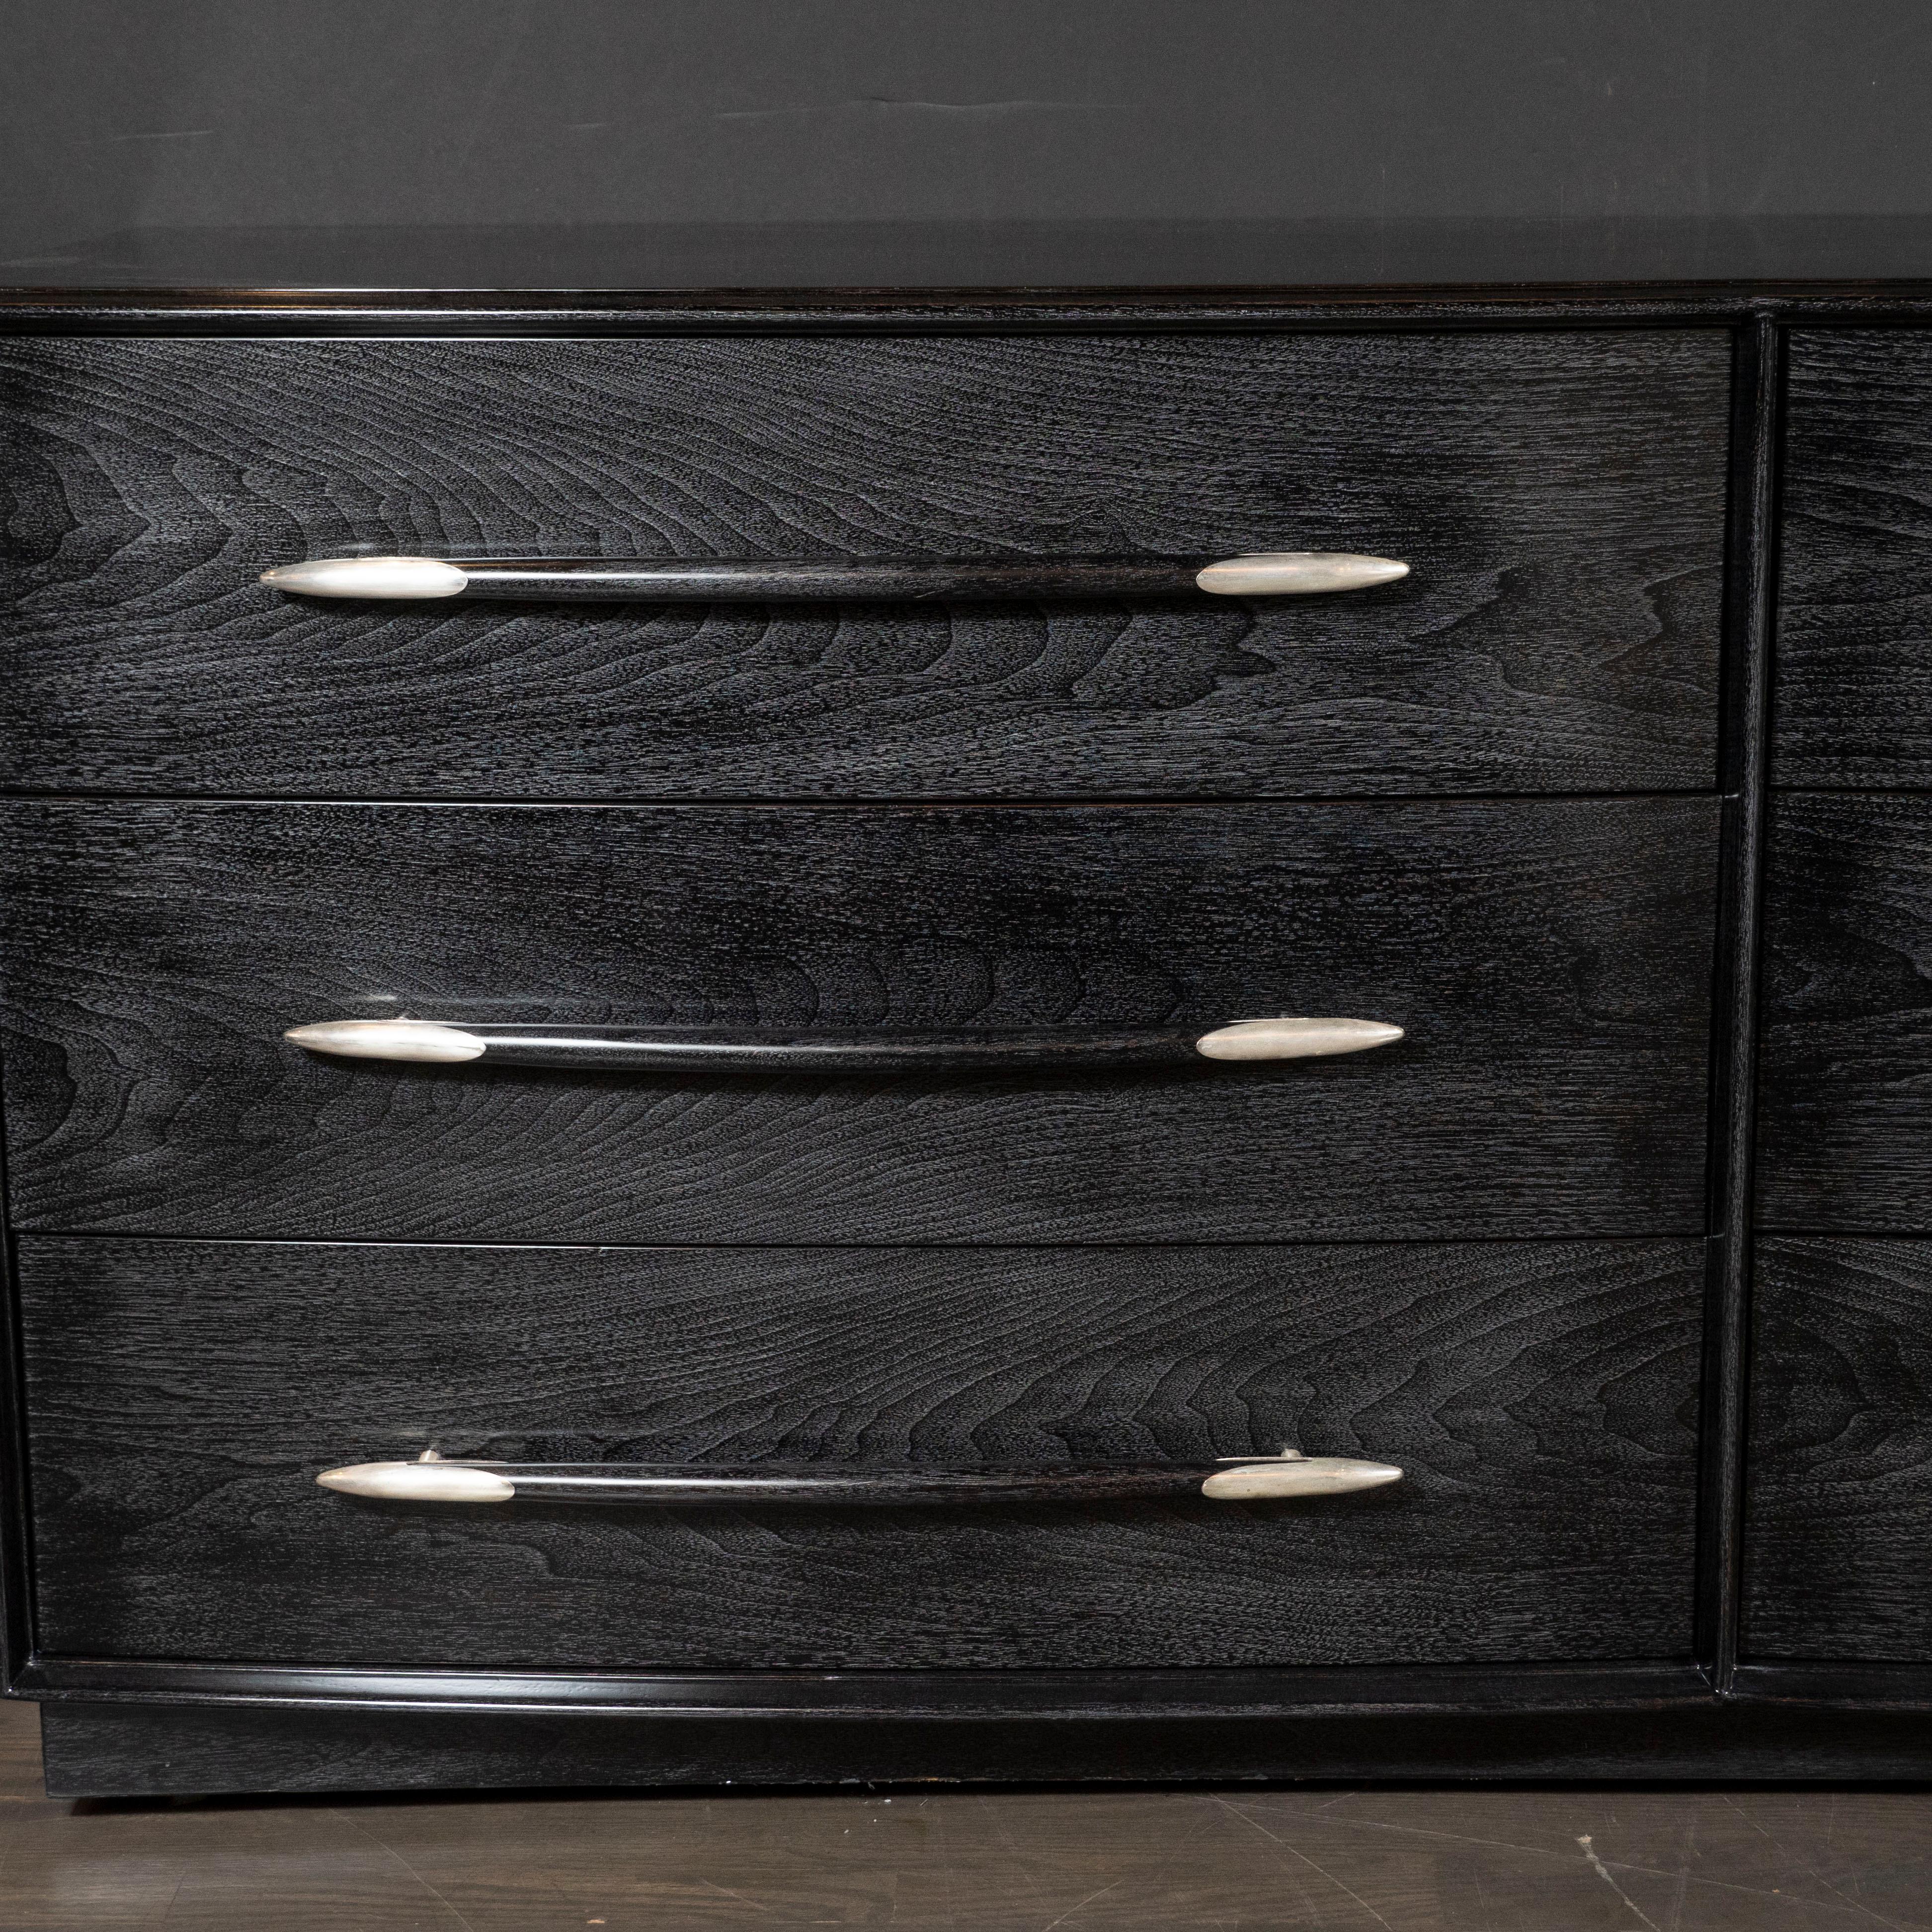 This elegant Mid-Century Modern low chest realized by the design luminary T.H. Robsjohn-Gibbings for the Widdicomb Furniture Co. in America, circa 1950. It features a rectilinear body with six drawers (three on each side)- offering a wealth of